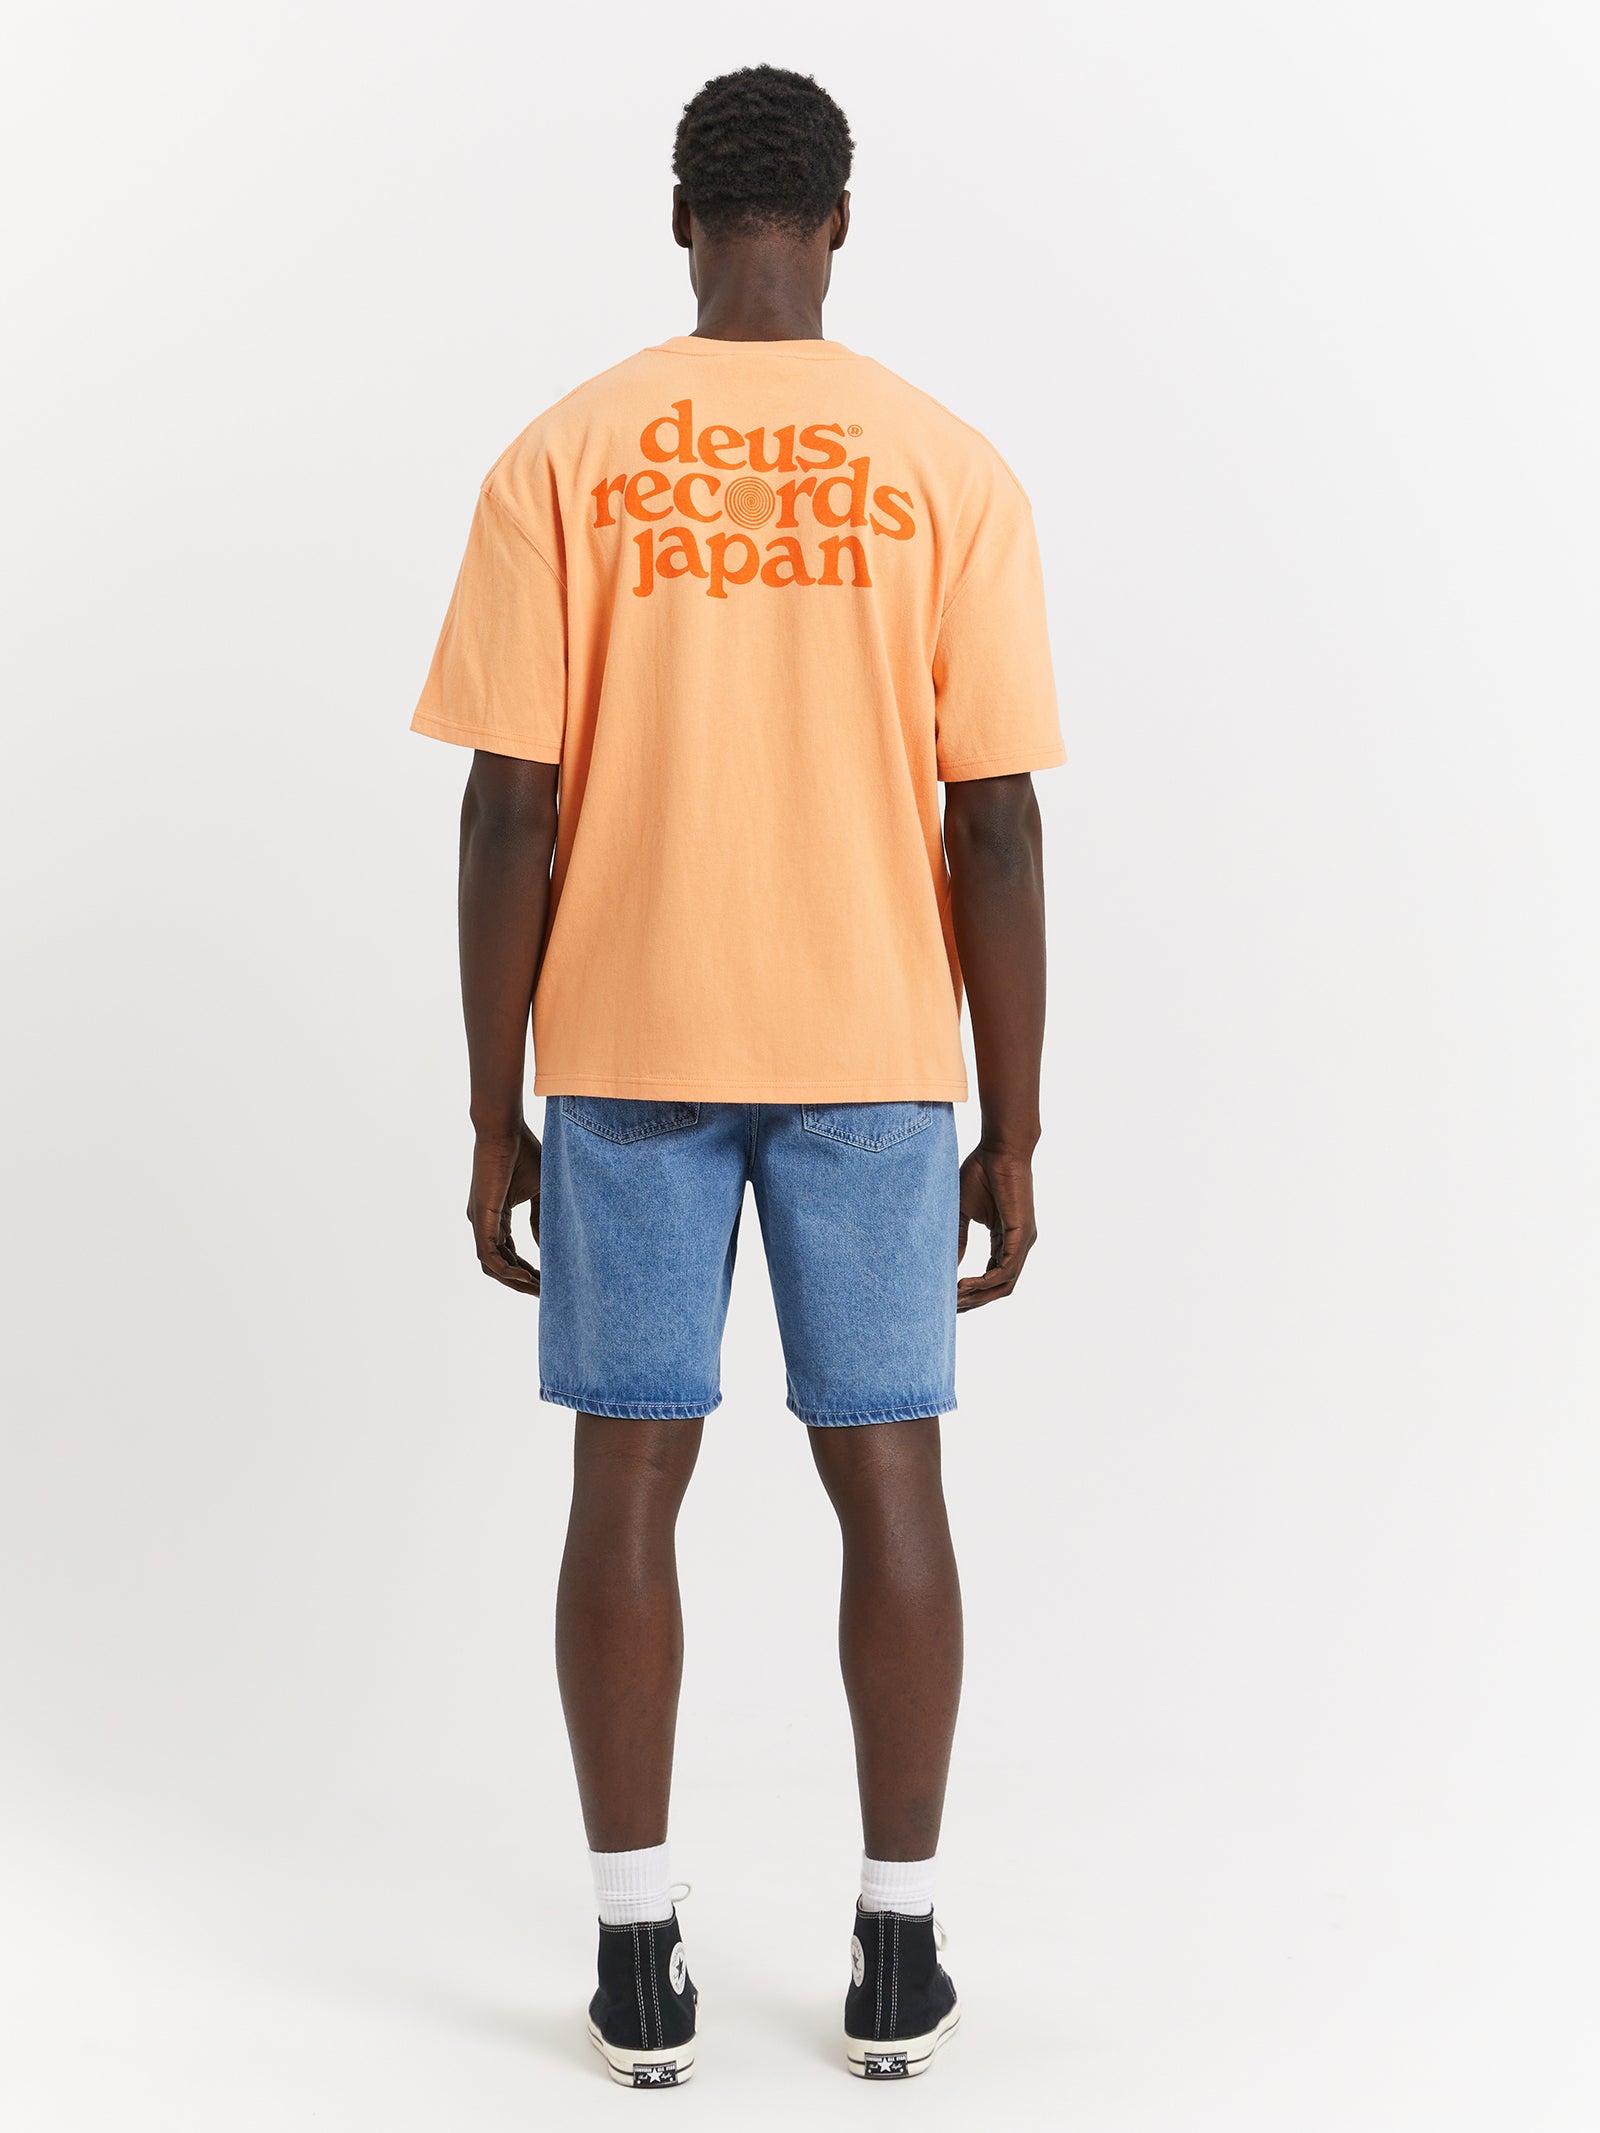 Strata T-Shirt in Apricot